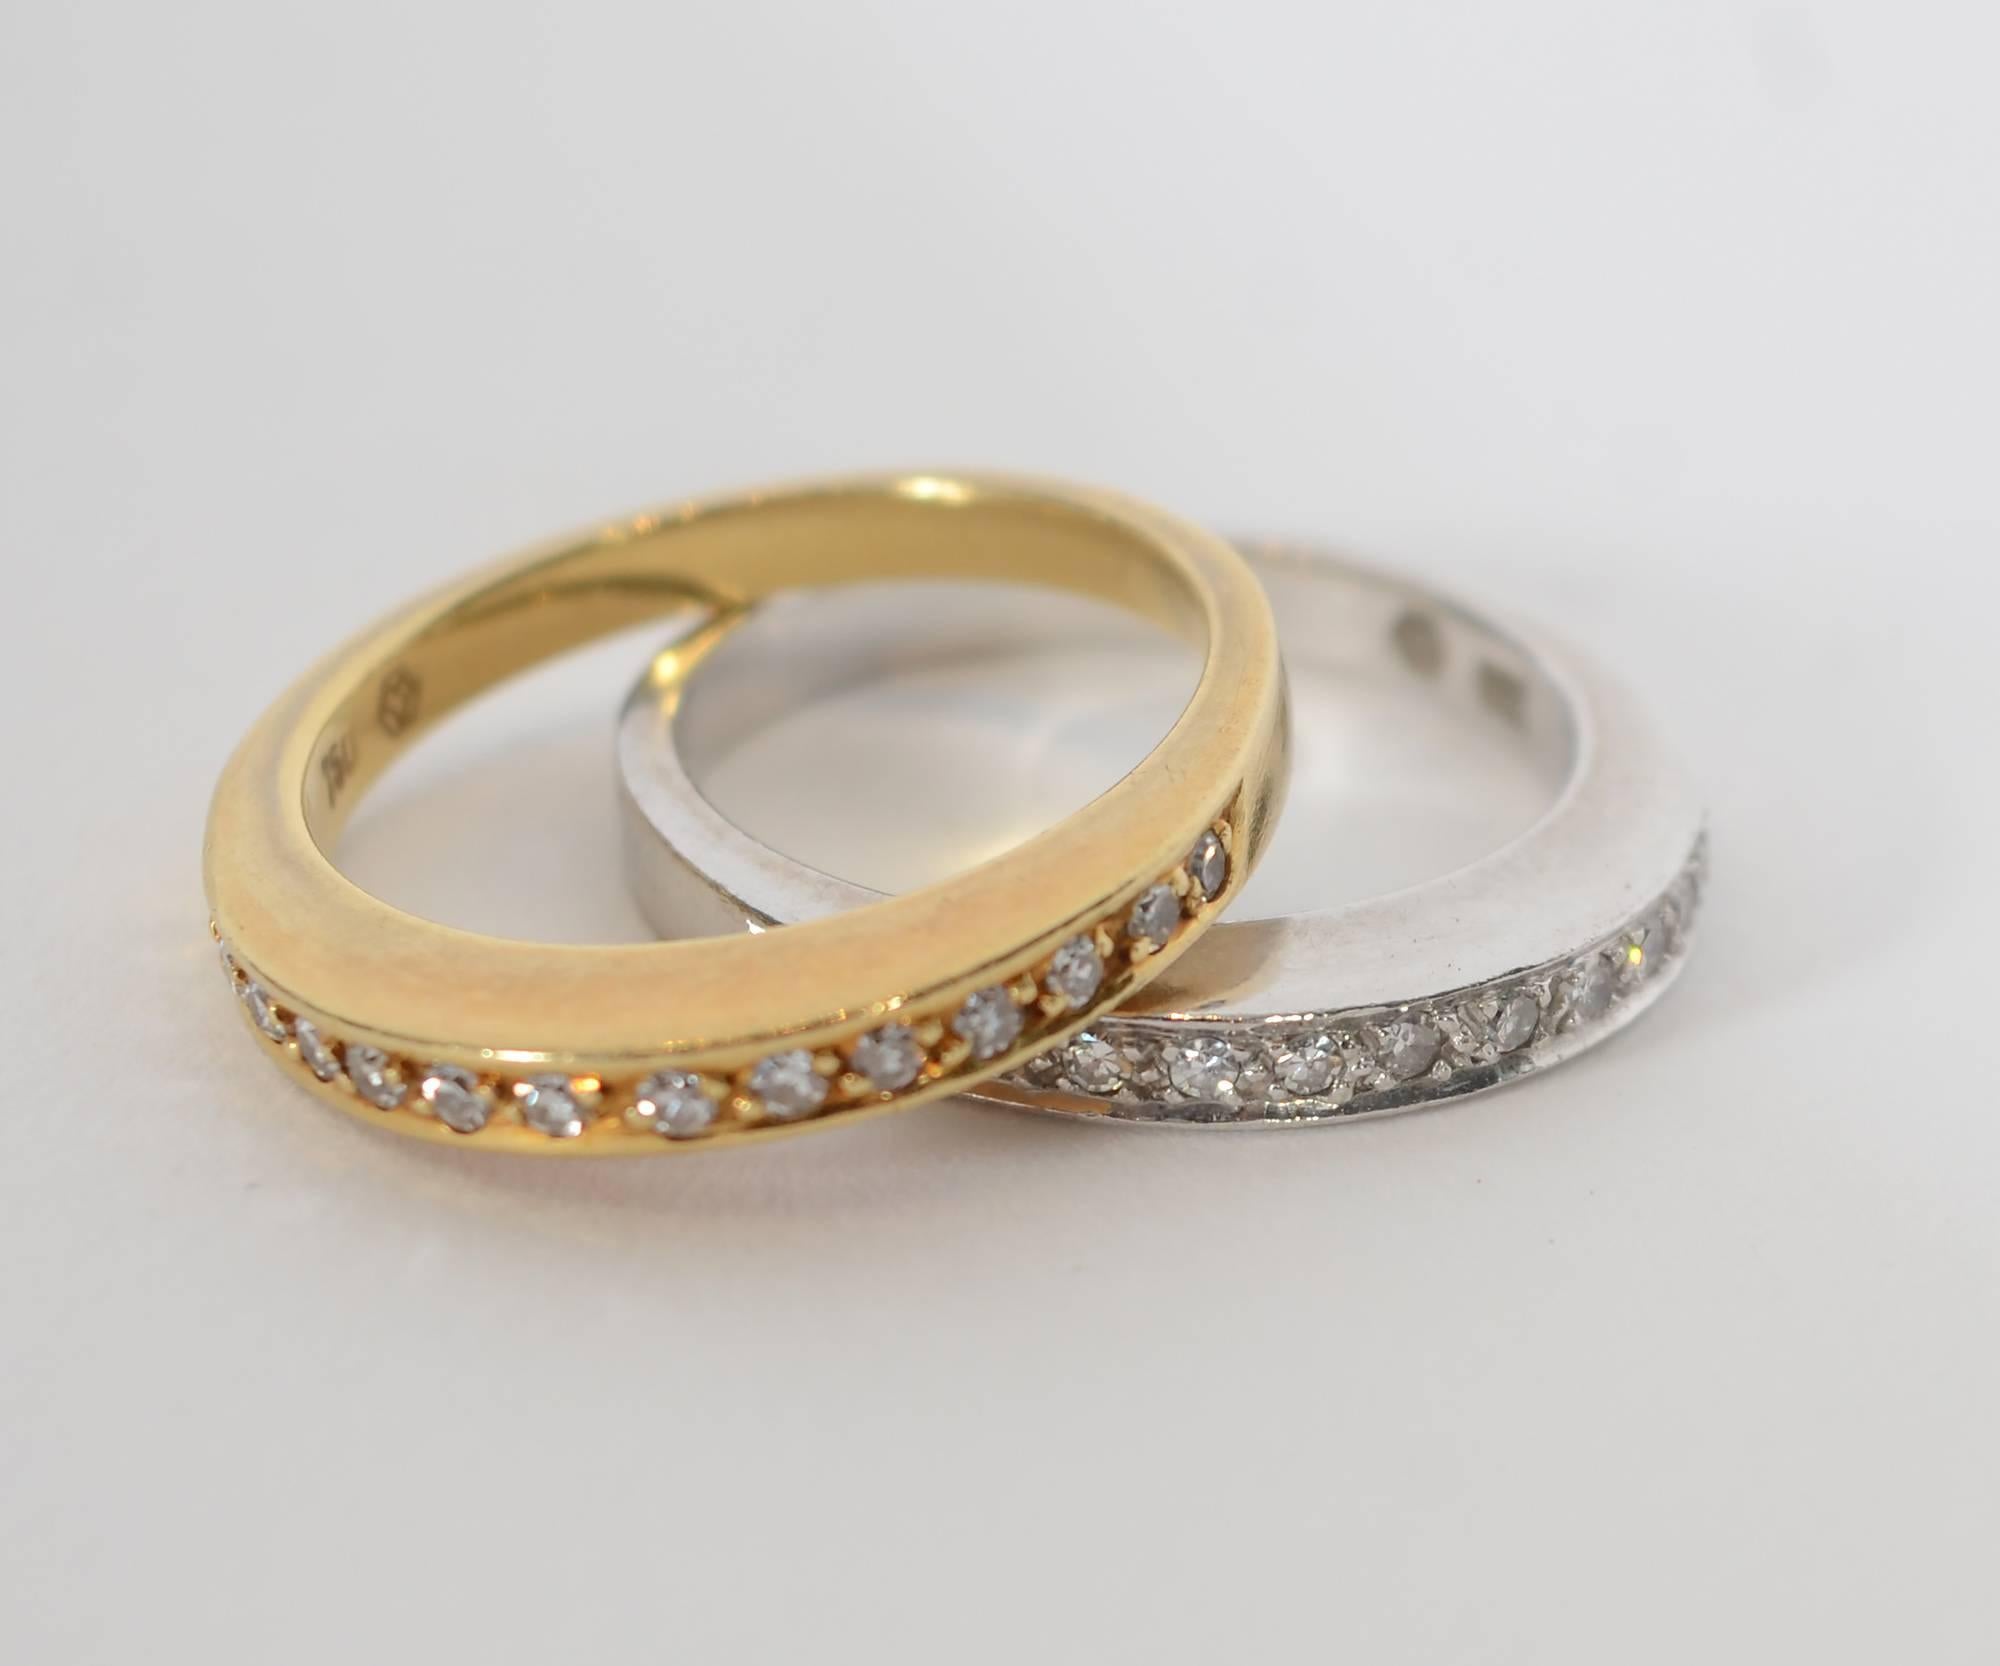 This pair of yellow and white gold diamond band rings was made by Victor M. Since 1989, Victor M has been the sole producer of jewelry for Faberge. The rings each have 15 diamonds with a total weight of about 1/2 carat. The rings are a hair larger